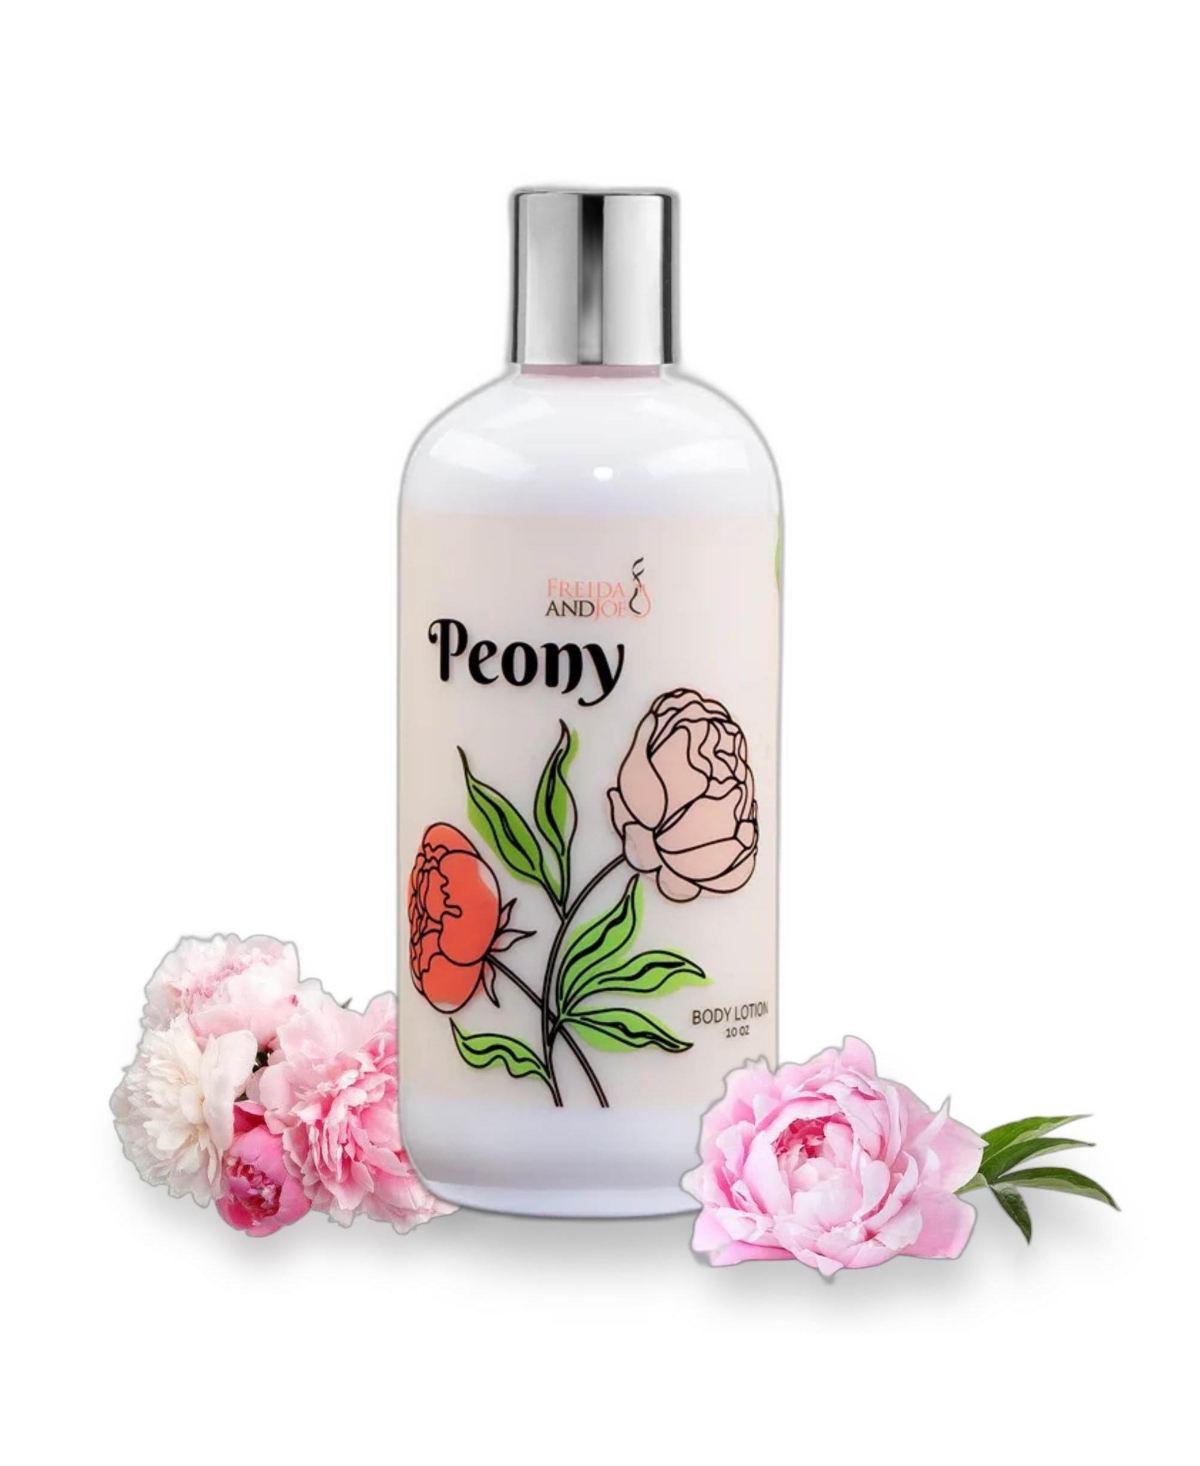 Fragrance Deep Moisturizing Body Lotion in 10oz Bottle Luxury Body Care Mothers Day Gifts for Mom - White rose jasmine